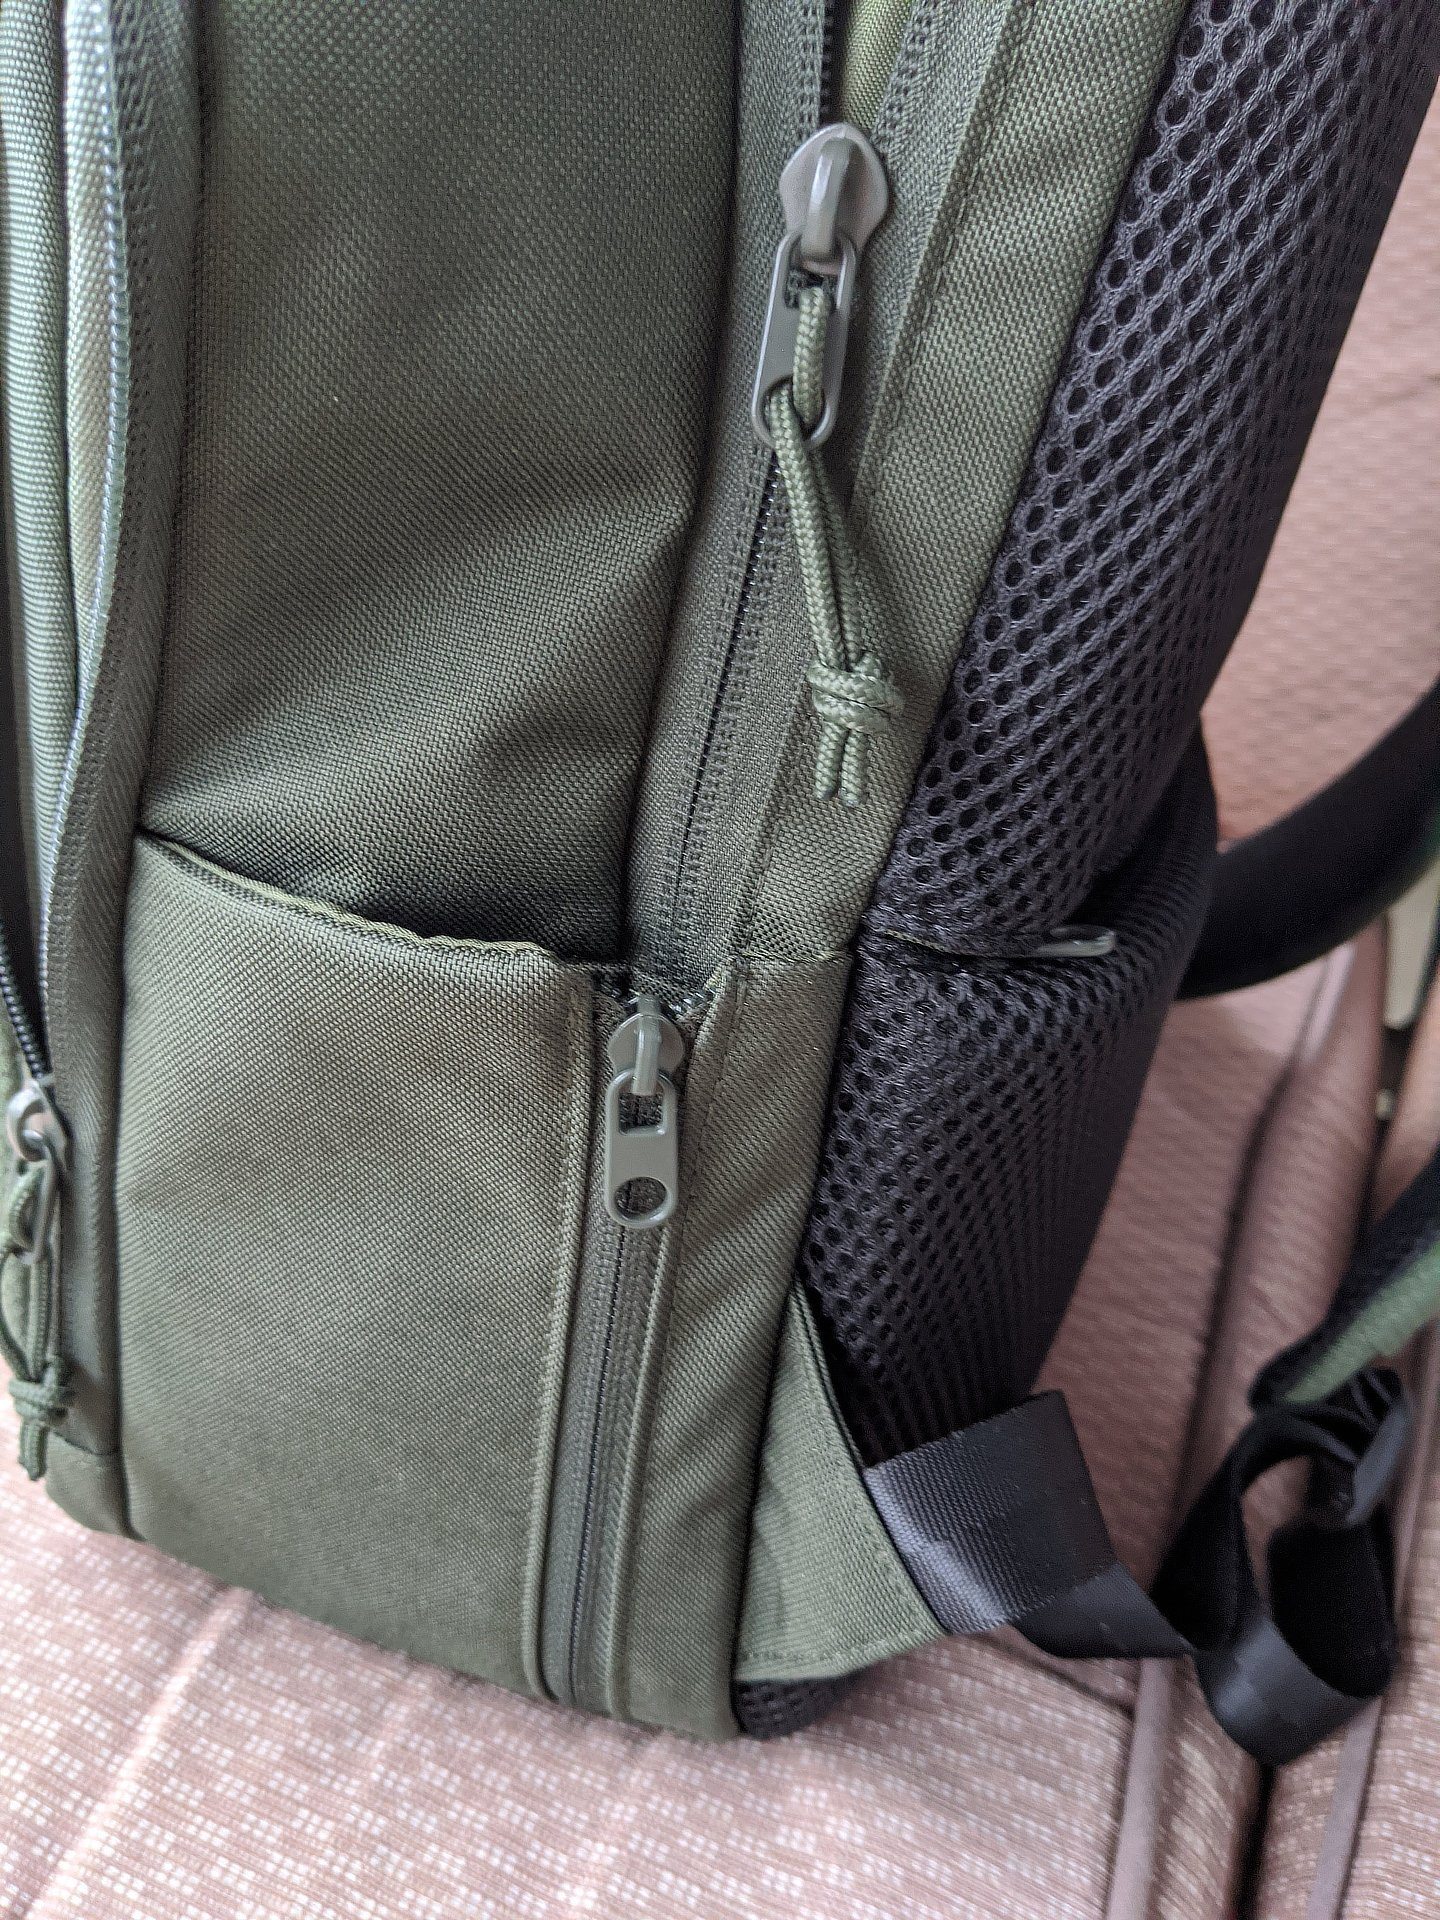 Lenovo Eco Pro Backpack Made Of Recyclable Material: Review